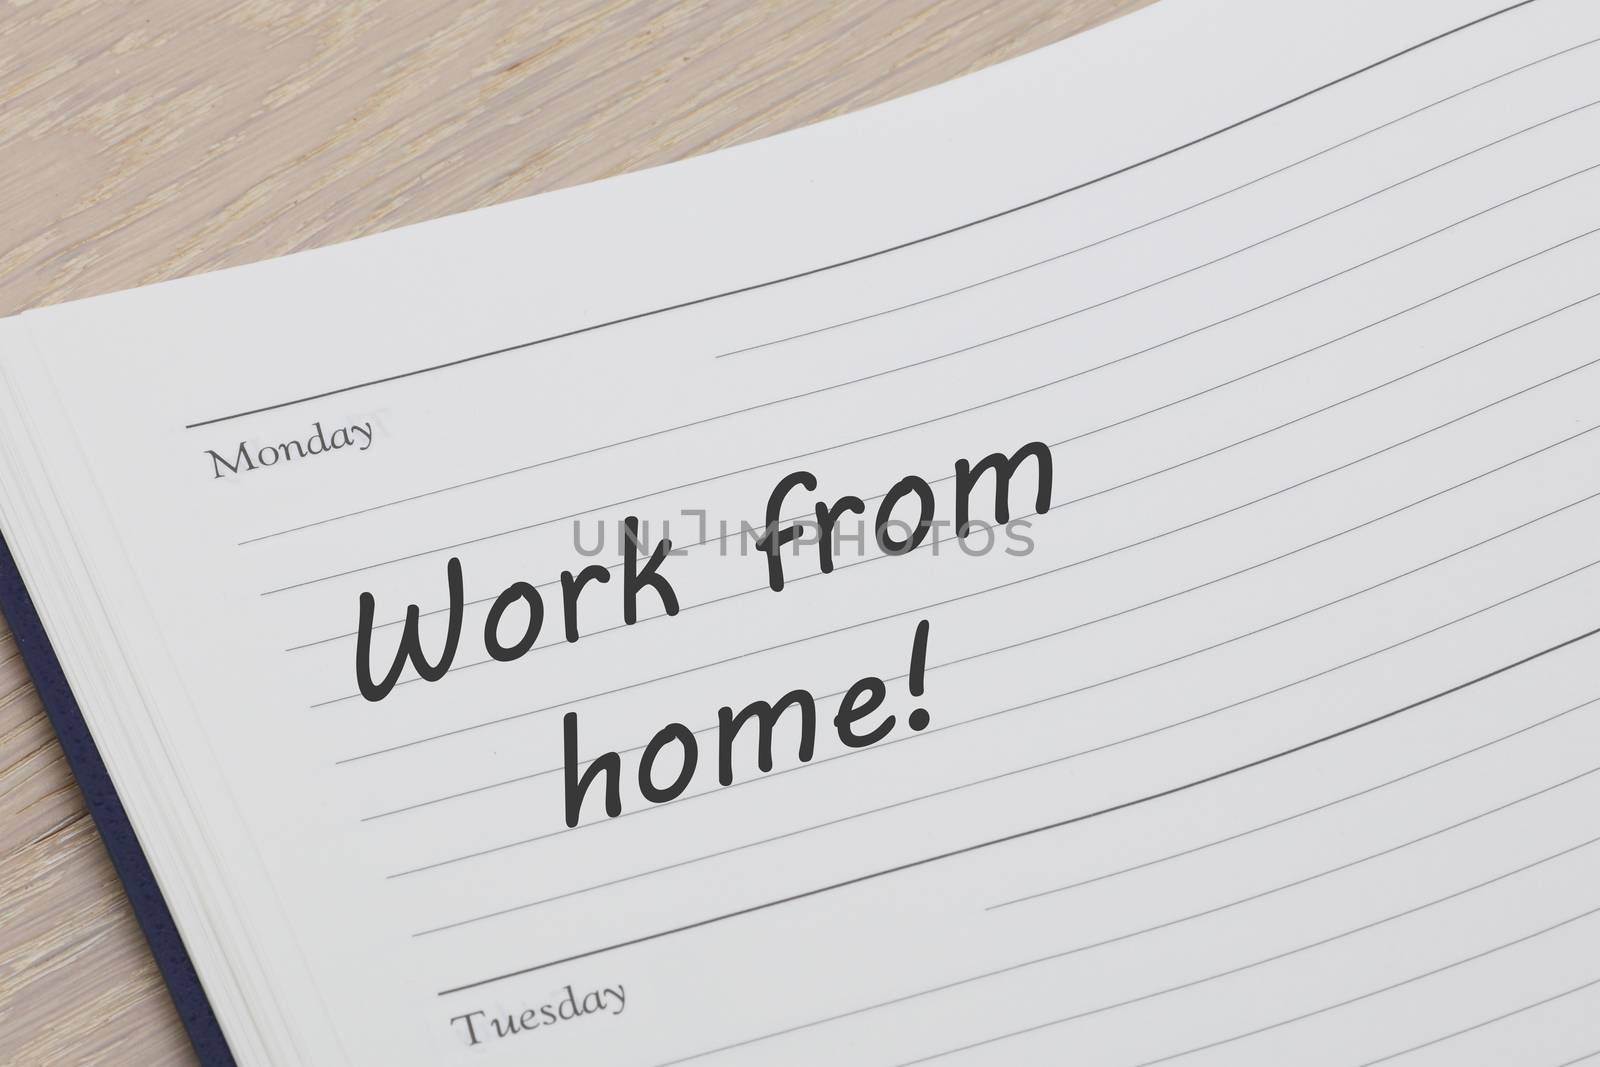 A work from home job diary reminder open on desk